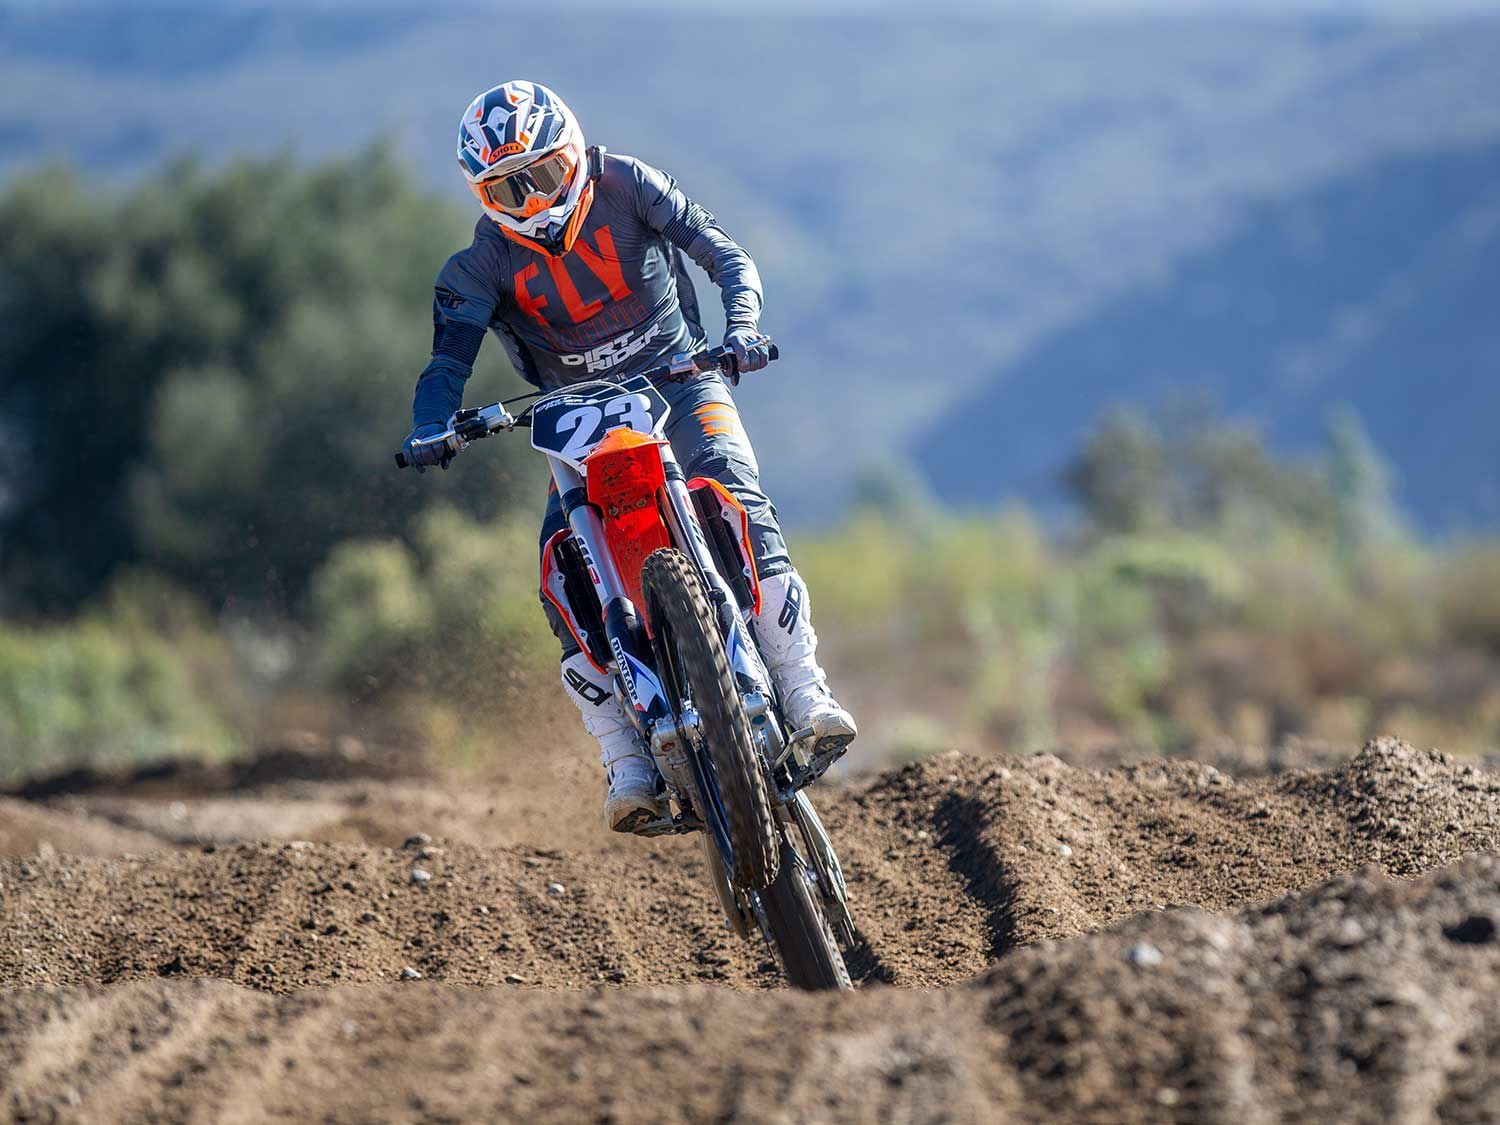 “The 250 SX-F is narrow, has a little bit of a chopper feeling, and feels like a longer wheelbase bike. The front and rear wheel seem to track in line versus a hinged feeling that I recall from the previous year model.” <em>—Allan Brown</em>